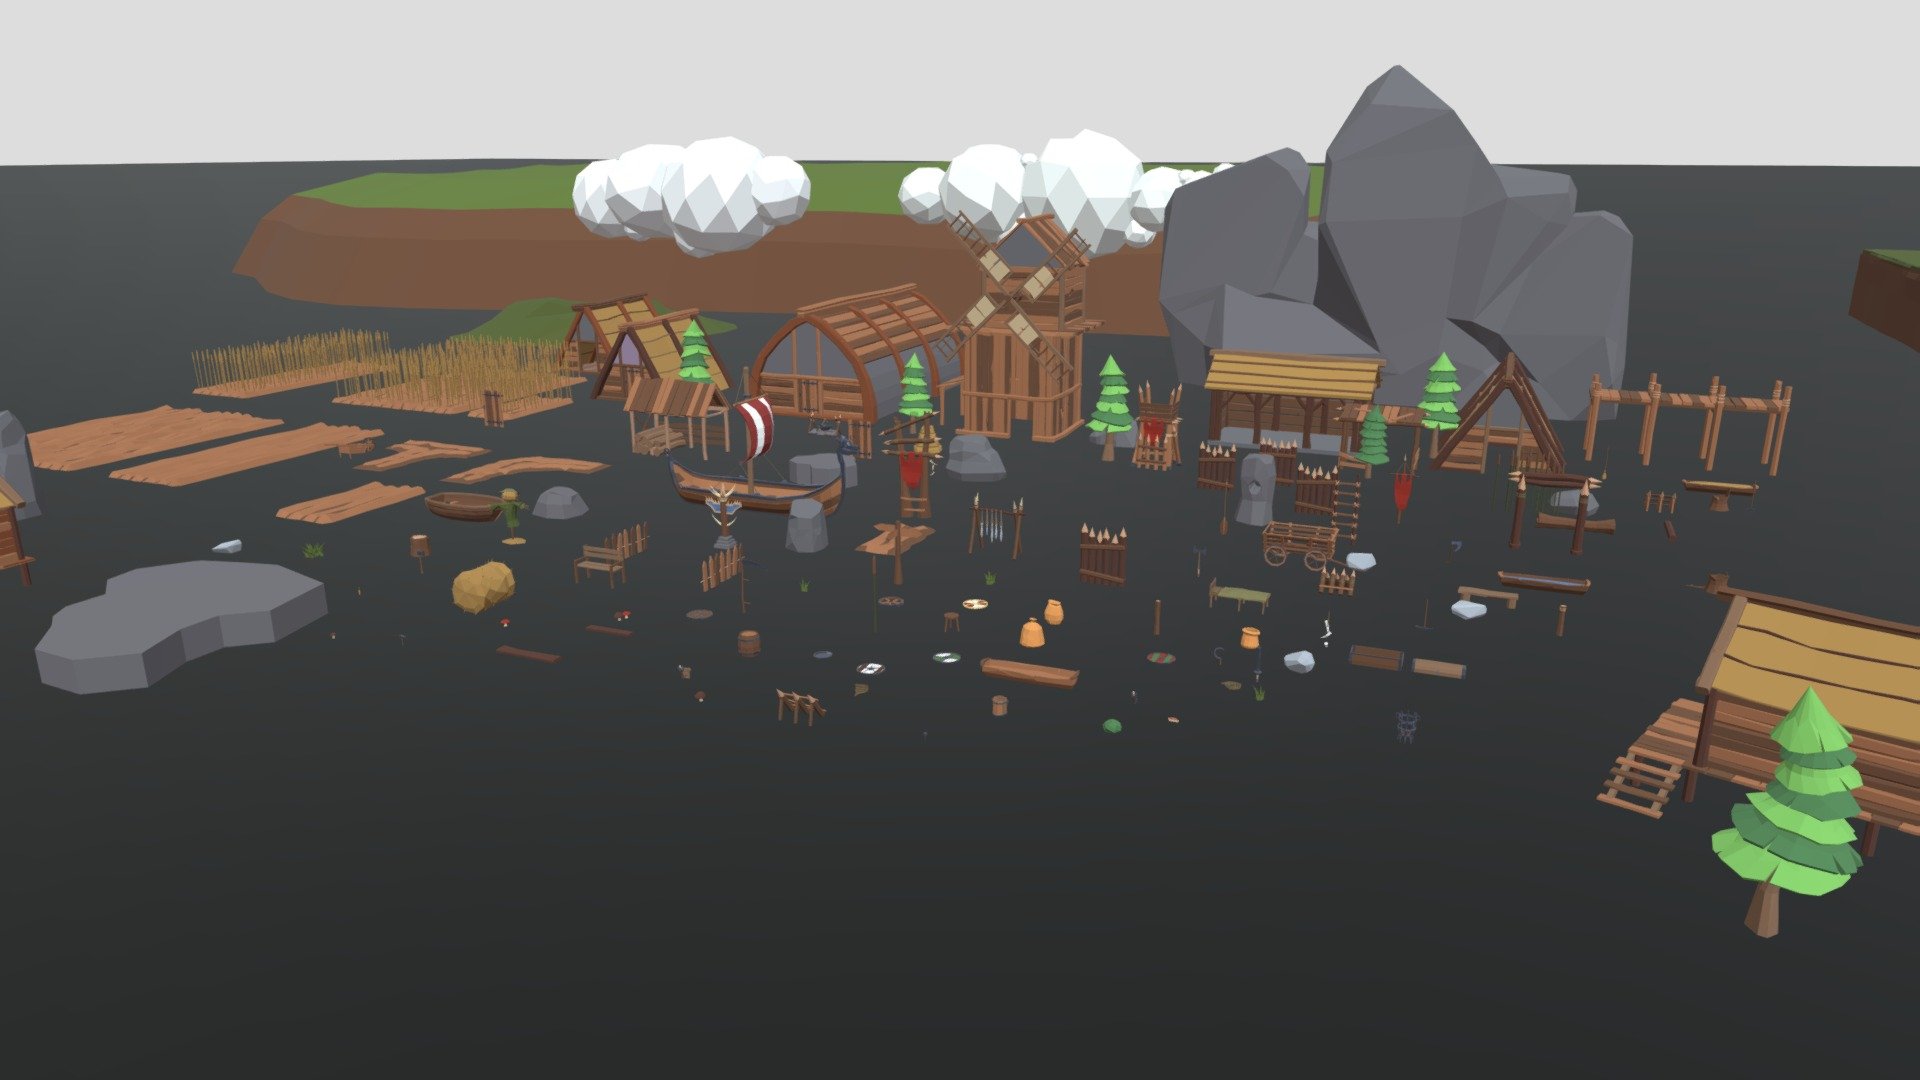 Low Poly - RG Medival Village
An Epic Low Poly asset pack of trees, buildings, rocks, tools, weapons, props, and others Environment assets to create a medievalvillage themed polygonal style game. You no longer need to browse the store for individual 3d models, only with this one pack alone you can build an amazing levels UNITY/FBX/OBJ/BLEND

UNITY:

-2 Scenes: Overview and Demo Scene like on the video
- 1 script: for rotating the windmill turbine
- 18 Materials: 1 main color material with atlas texture, 1 floor material, 2 metalic materials and 14 simple standard diffuse materials
- 3 Textures : 1 atlas texture 64x64, 2 floor textures 1920 x 1080
- 135 unique prefabs:

FBX/OBJ/BLEND:
contains 135 models

3 materials
2 textures 
each model has 2 uv maps, the first for coloring, the second lightmap
- does not include scene demo - Medieval Village Megapack Low Poly RG - Buy Royalty Free 3D model by RGPoly 3d model